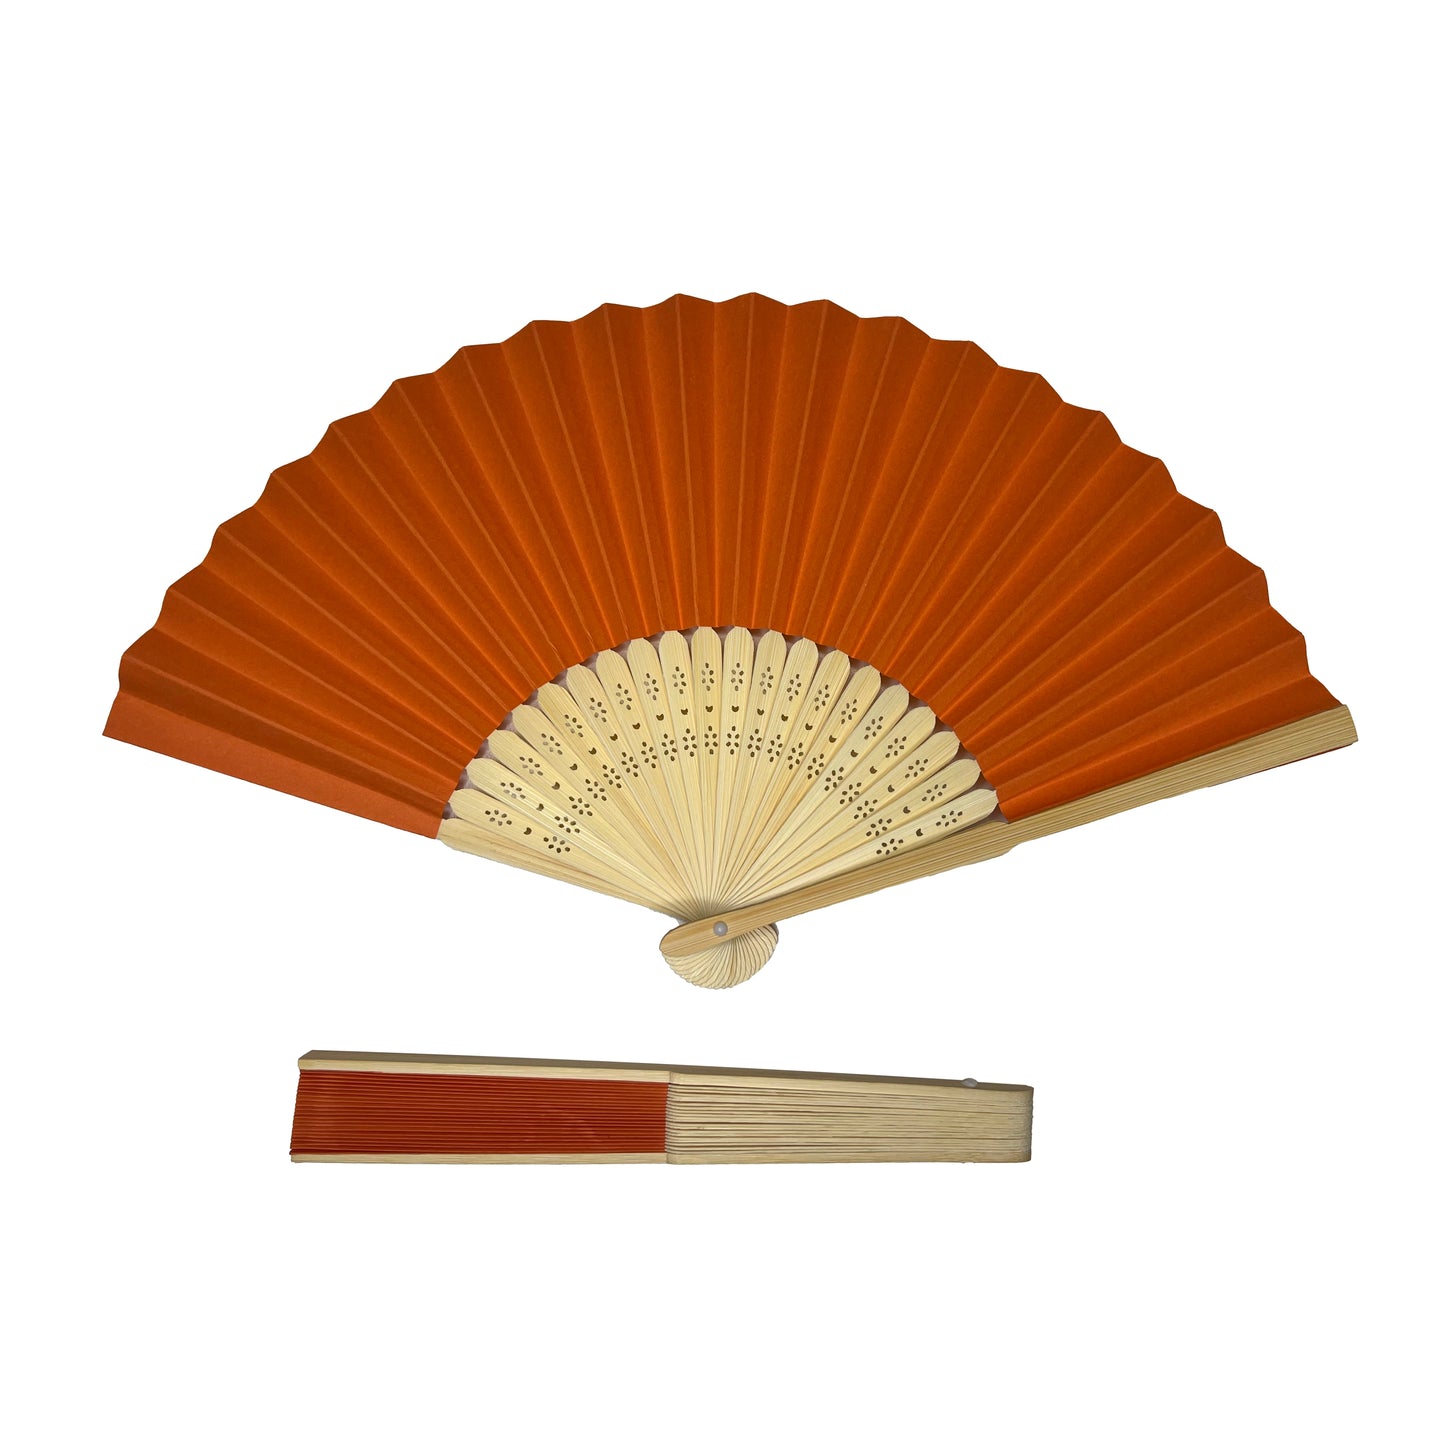 Pack of 50 Orange Paper Foldable Hand Held Bamboo Wooden Fans by Parev